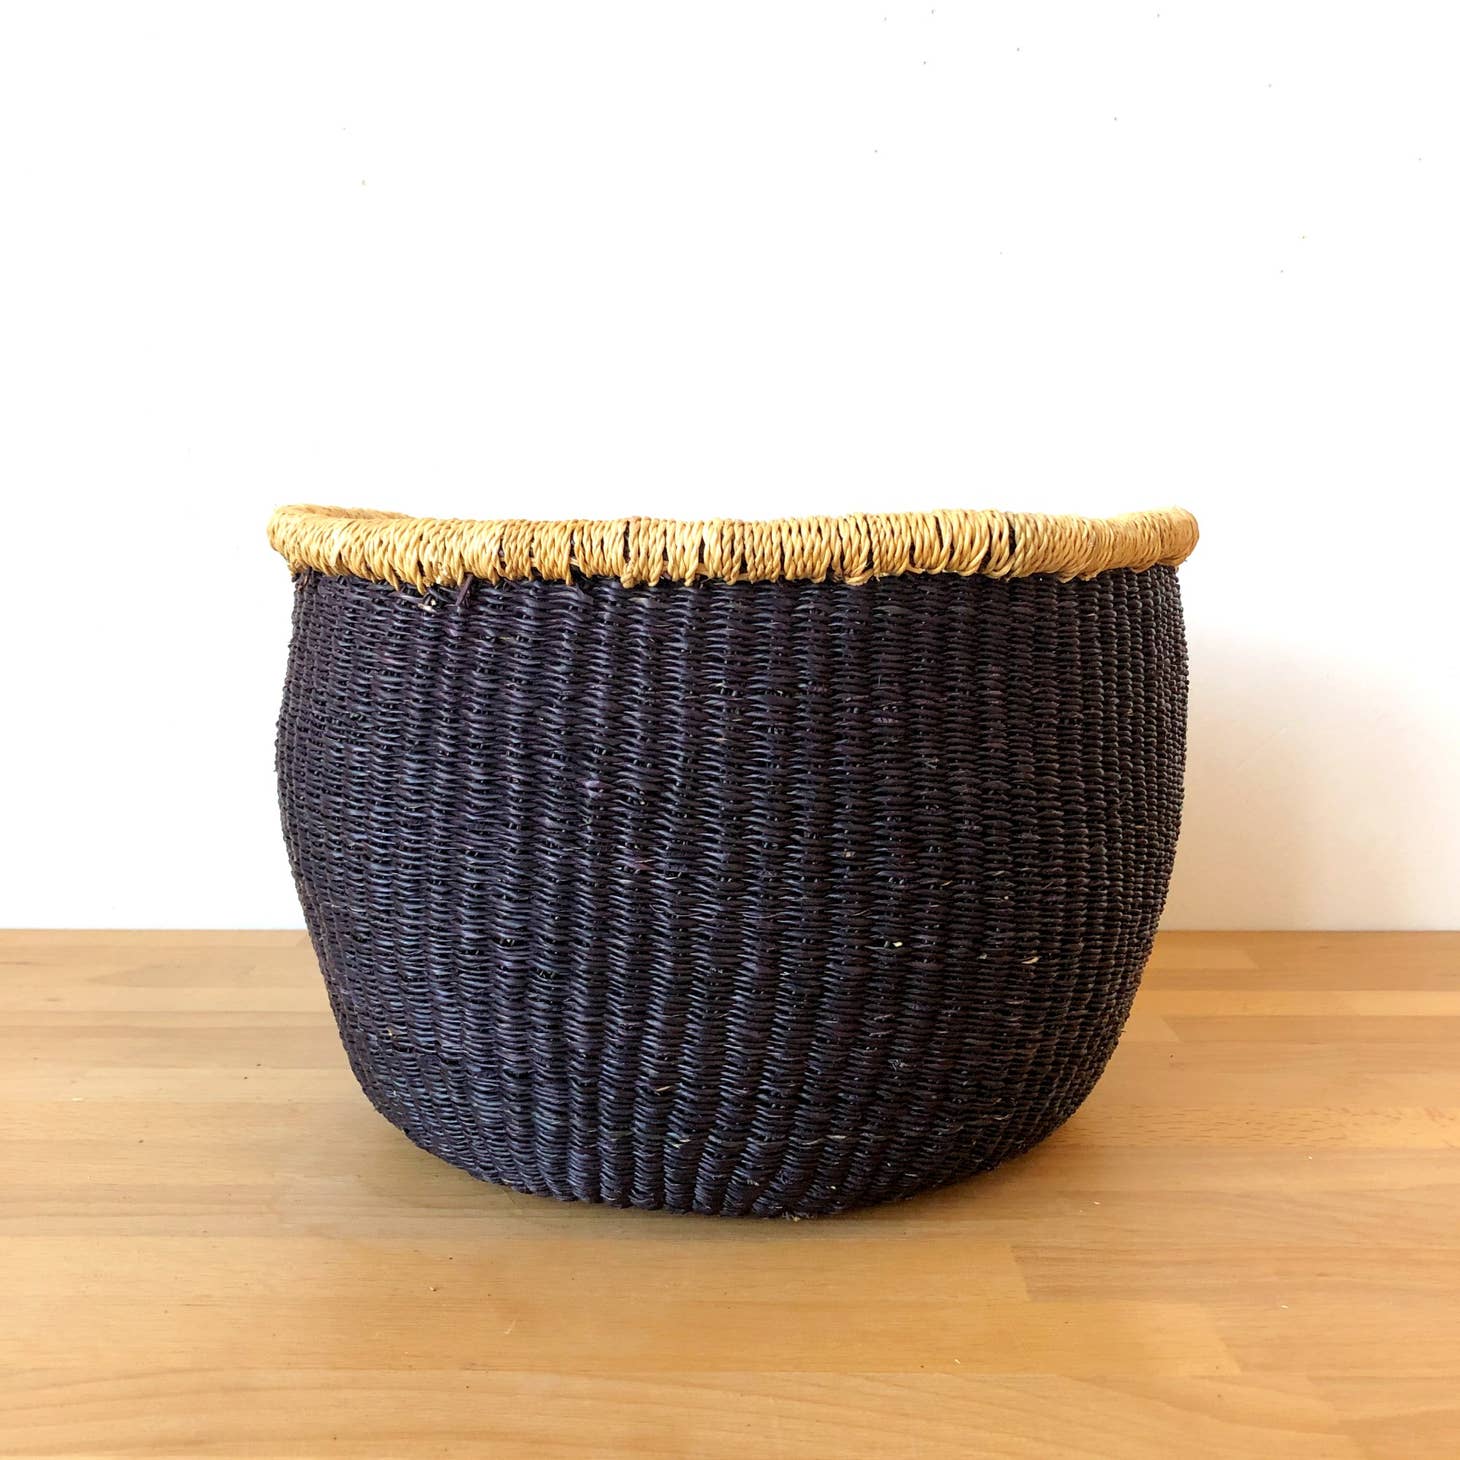 This storage basket is great for holding blankets, toys, knitting supplies and other things.  It is handwoven from veta vera grass in northern Ghana. The grass is dried, split, rolled, and dyed, before being woven into this beautiful work of art.